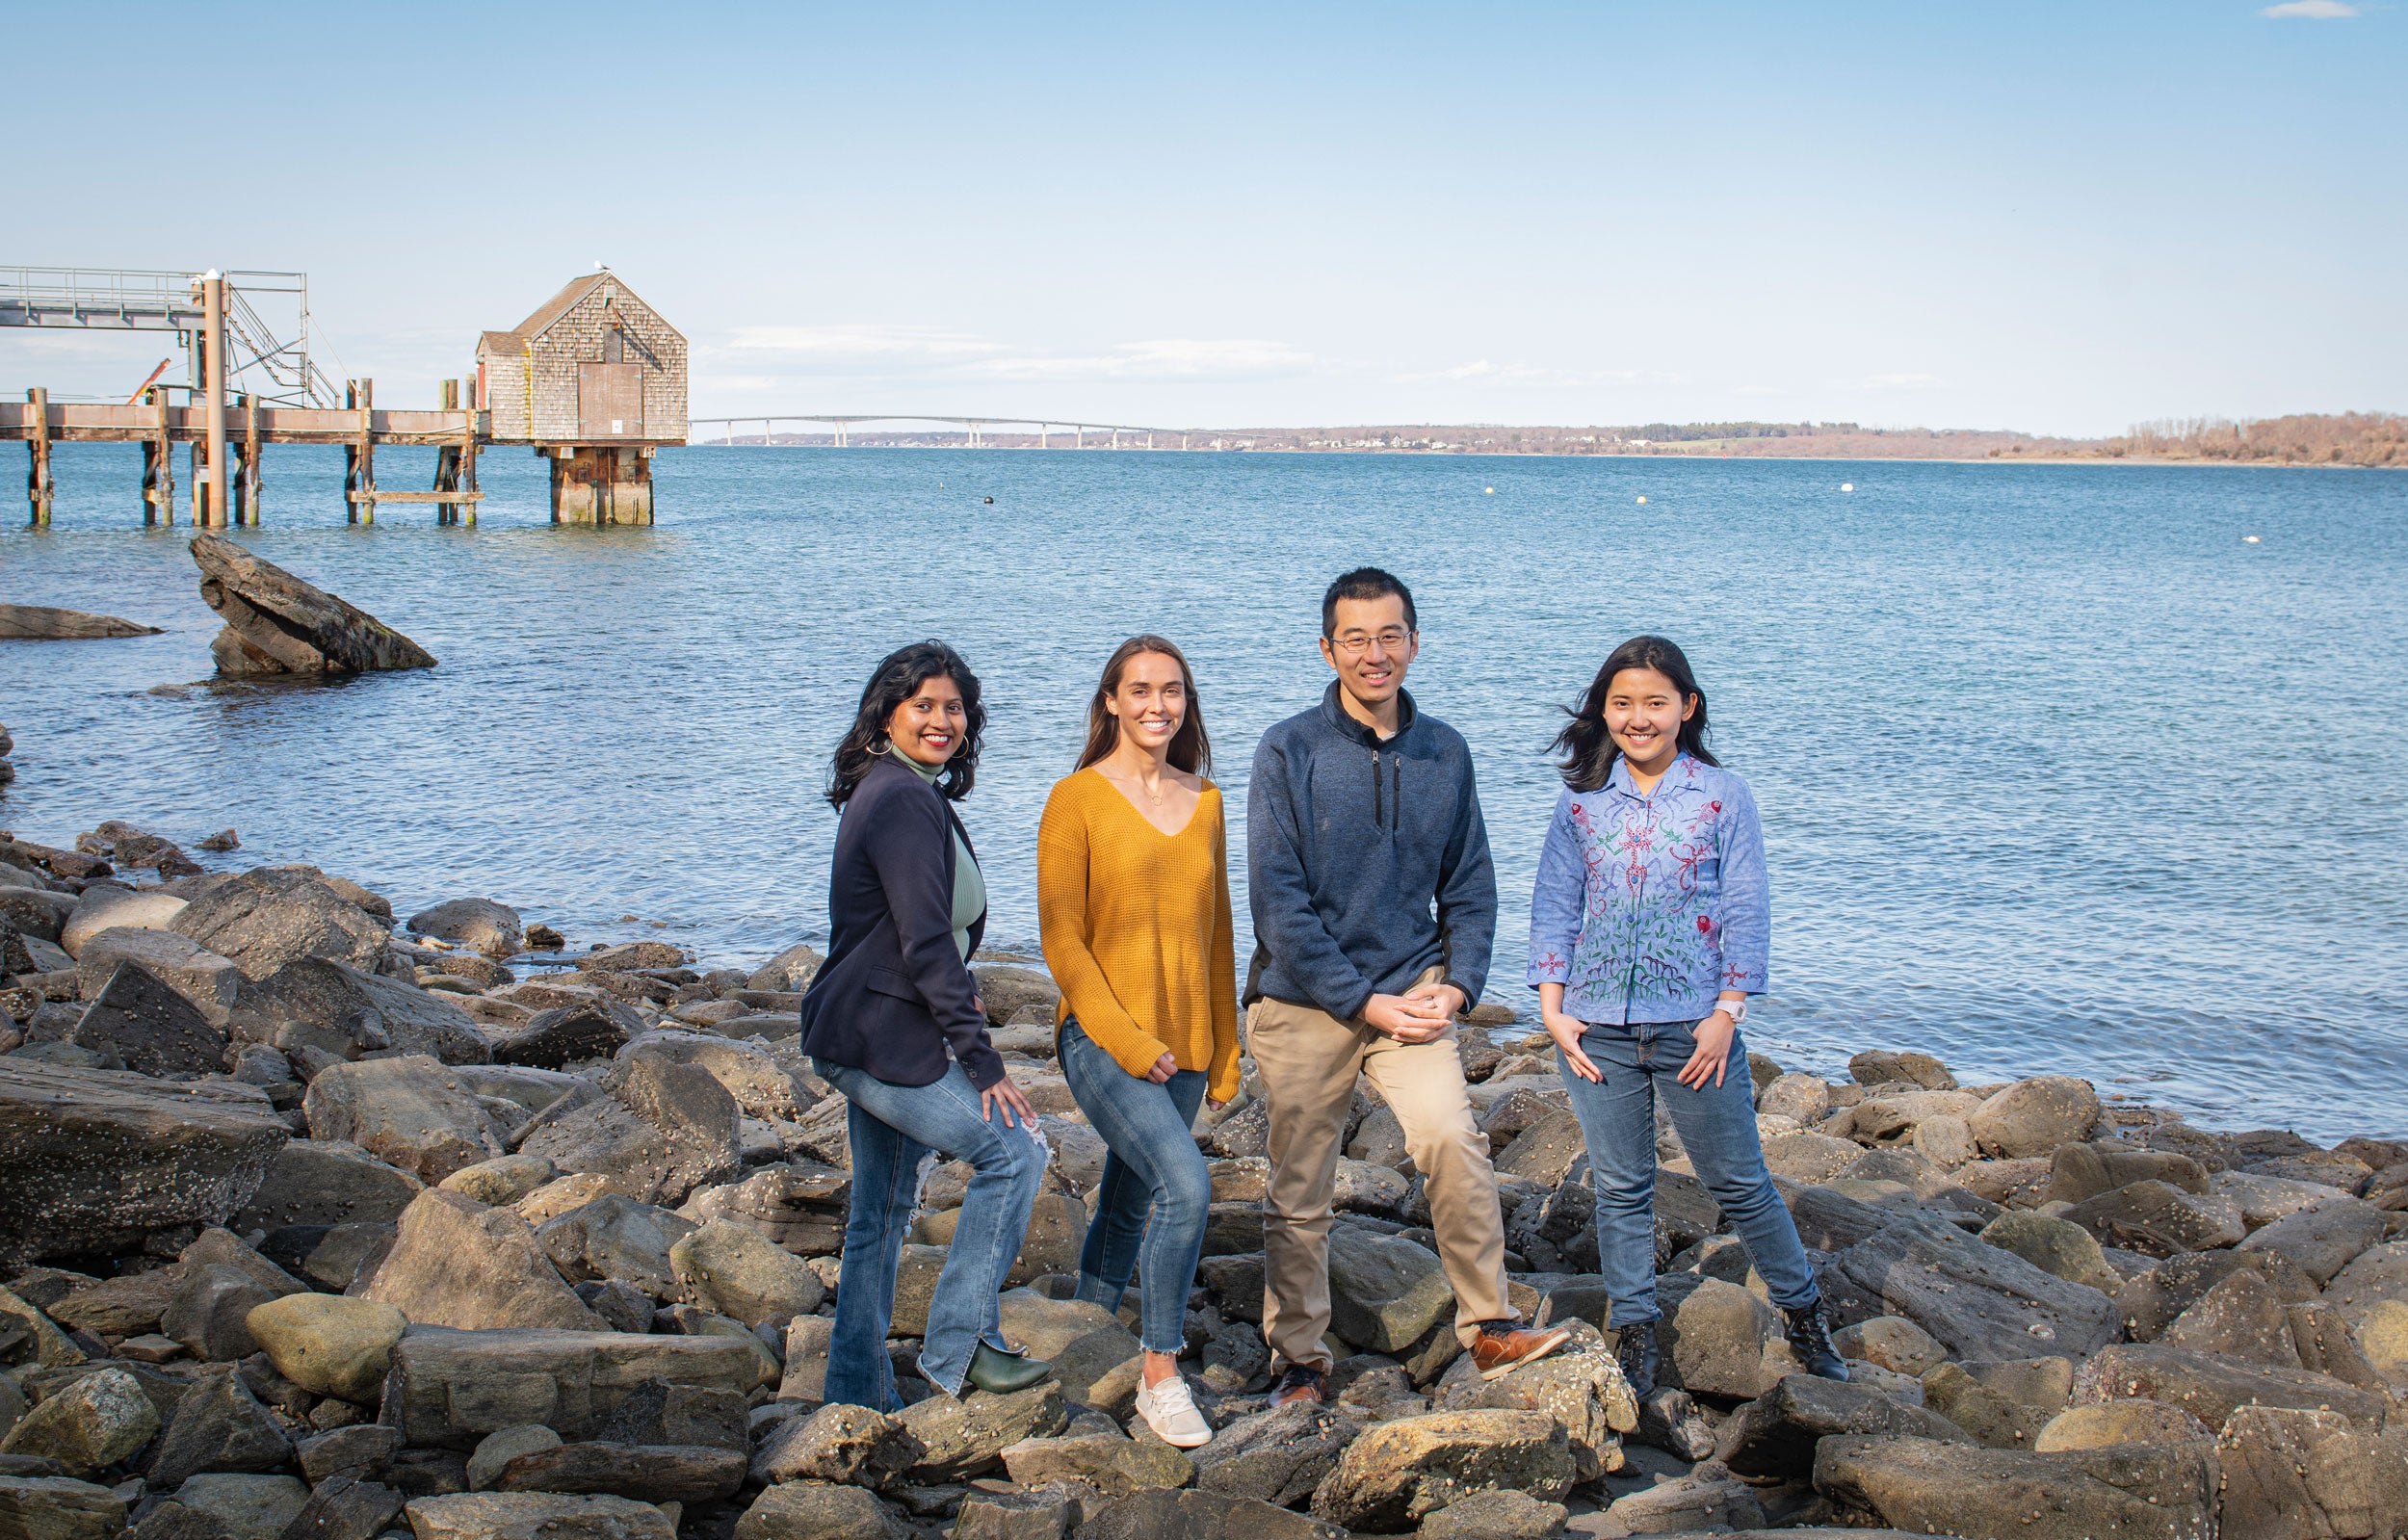 Graduate students participating in Hacking4Oceans project standing on the rocks in front of Narragansett Bay.